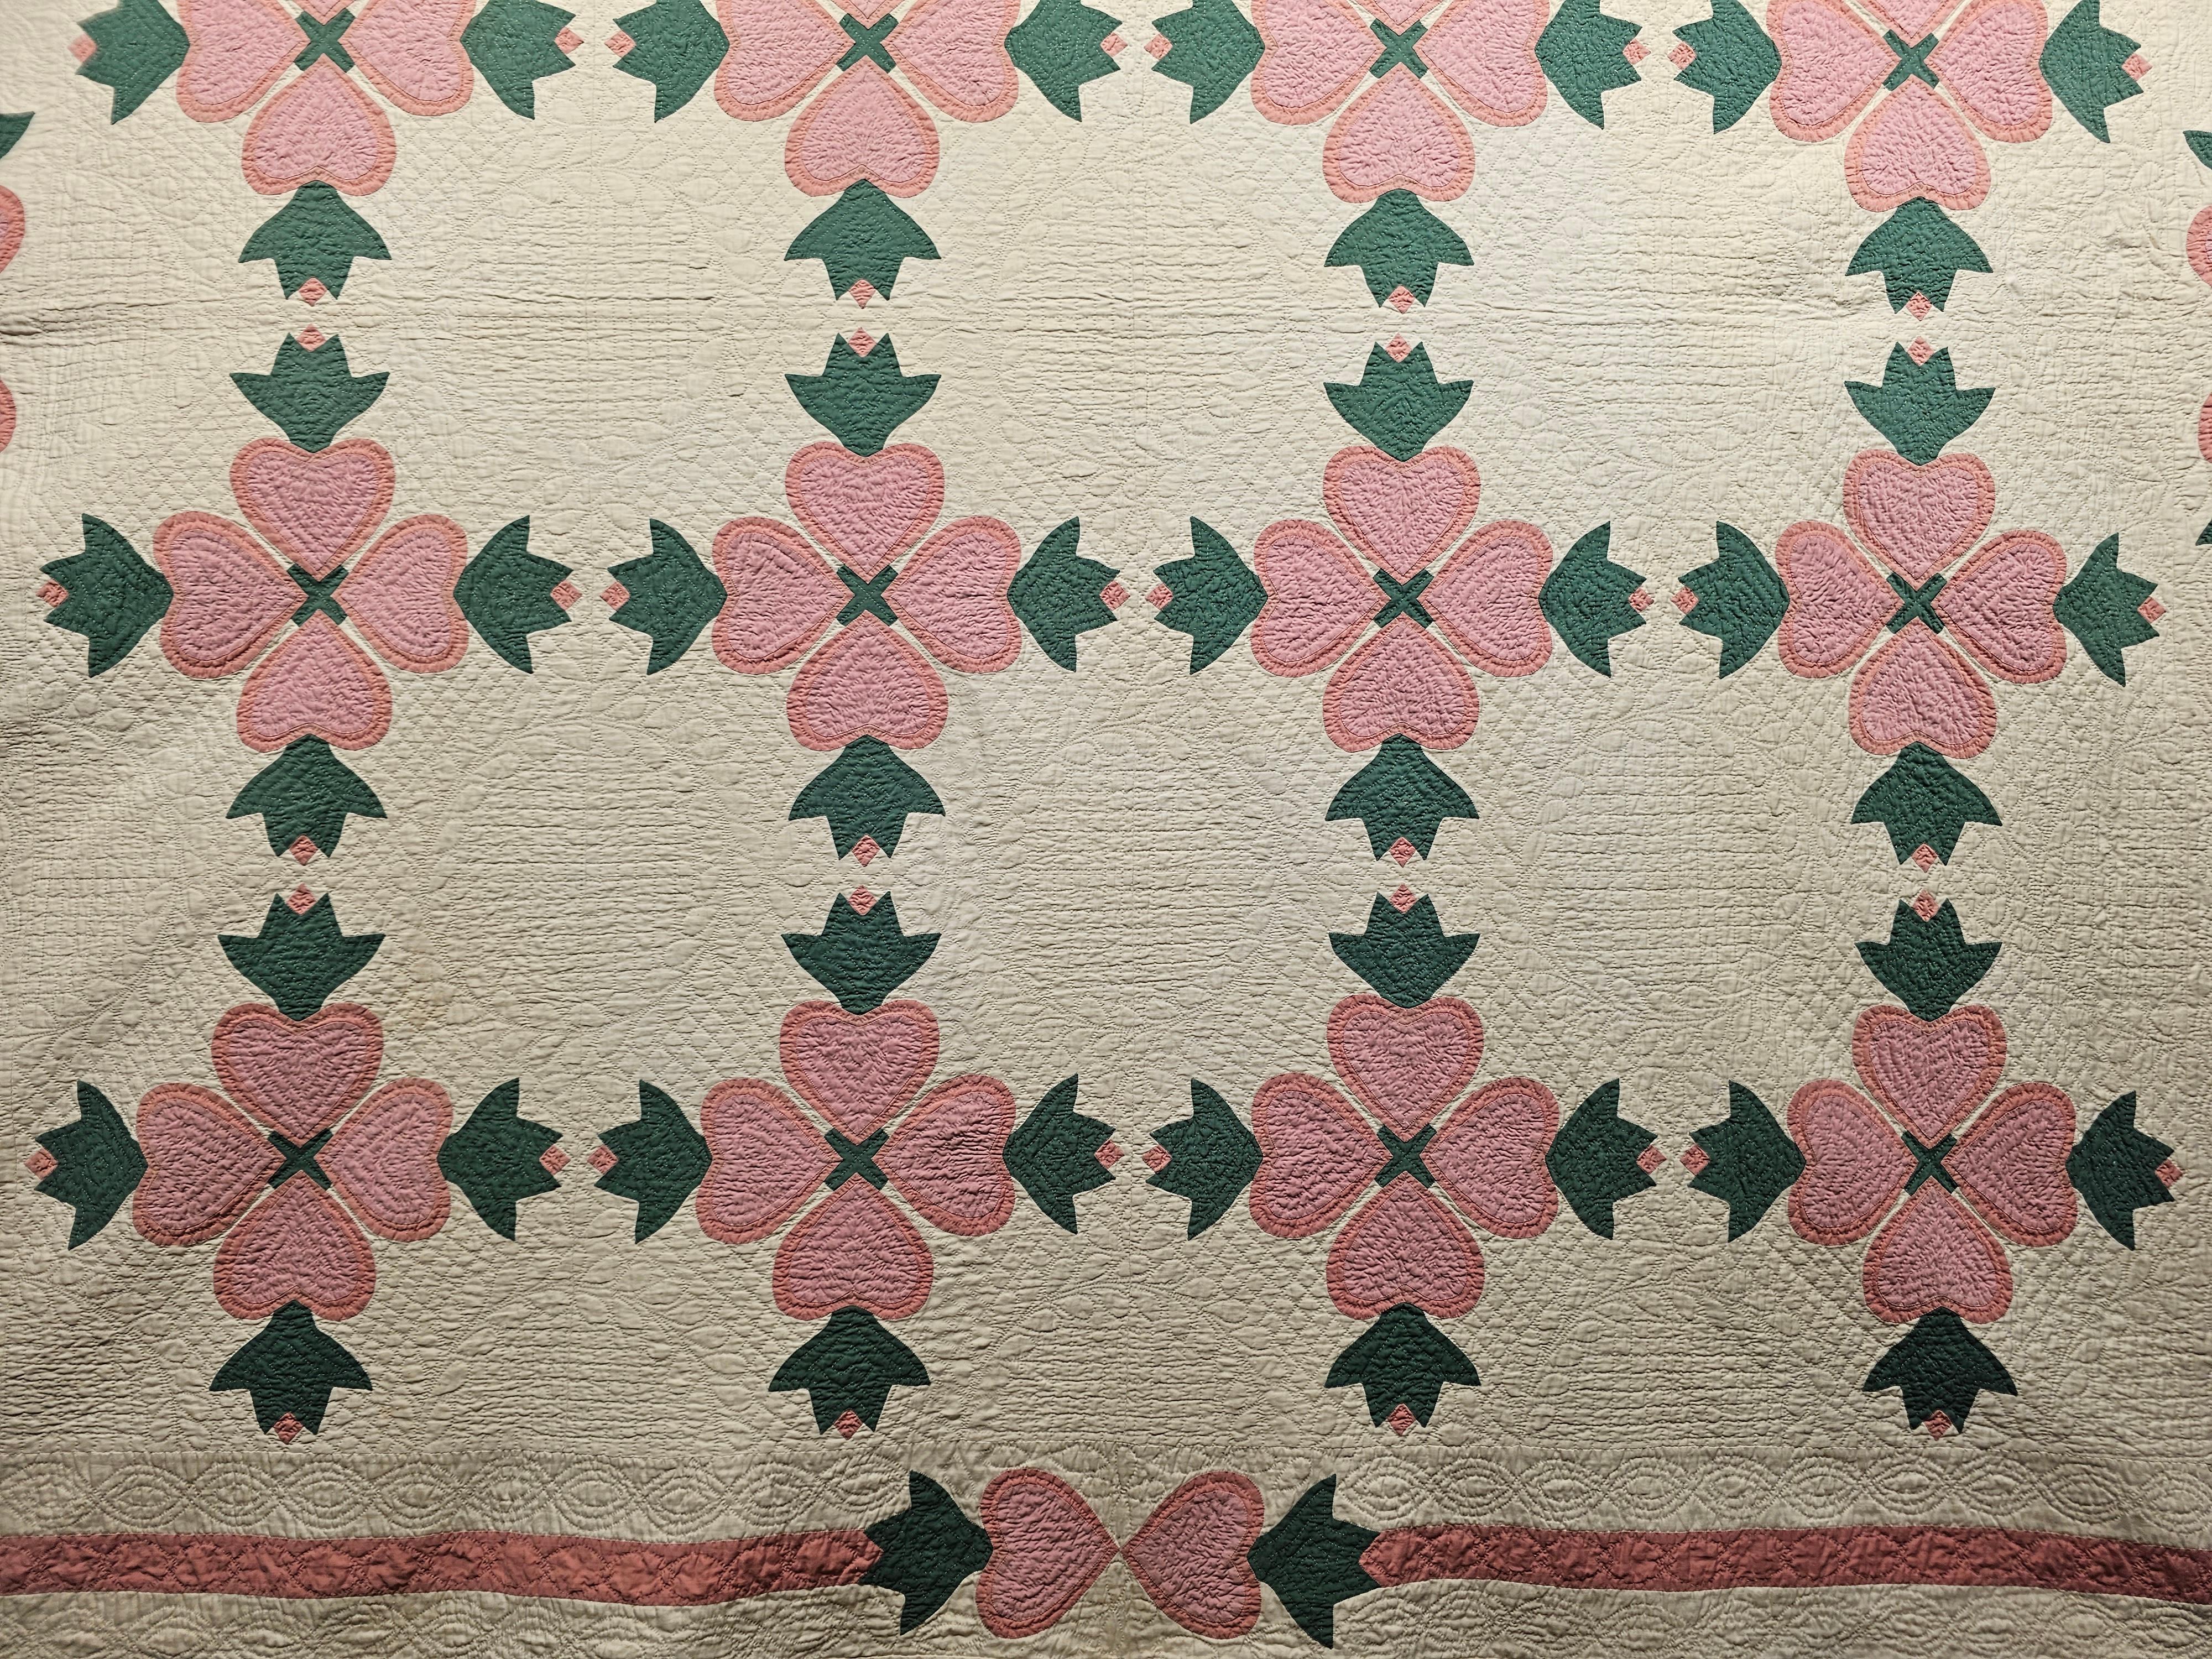 Appliqué 19th Century American Applique Quilt in Hearts and Tulips Pattern in Ivory, Pink For Sale